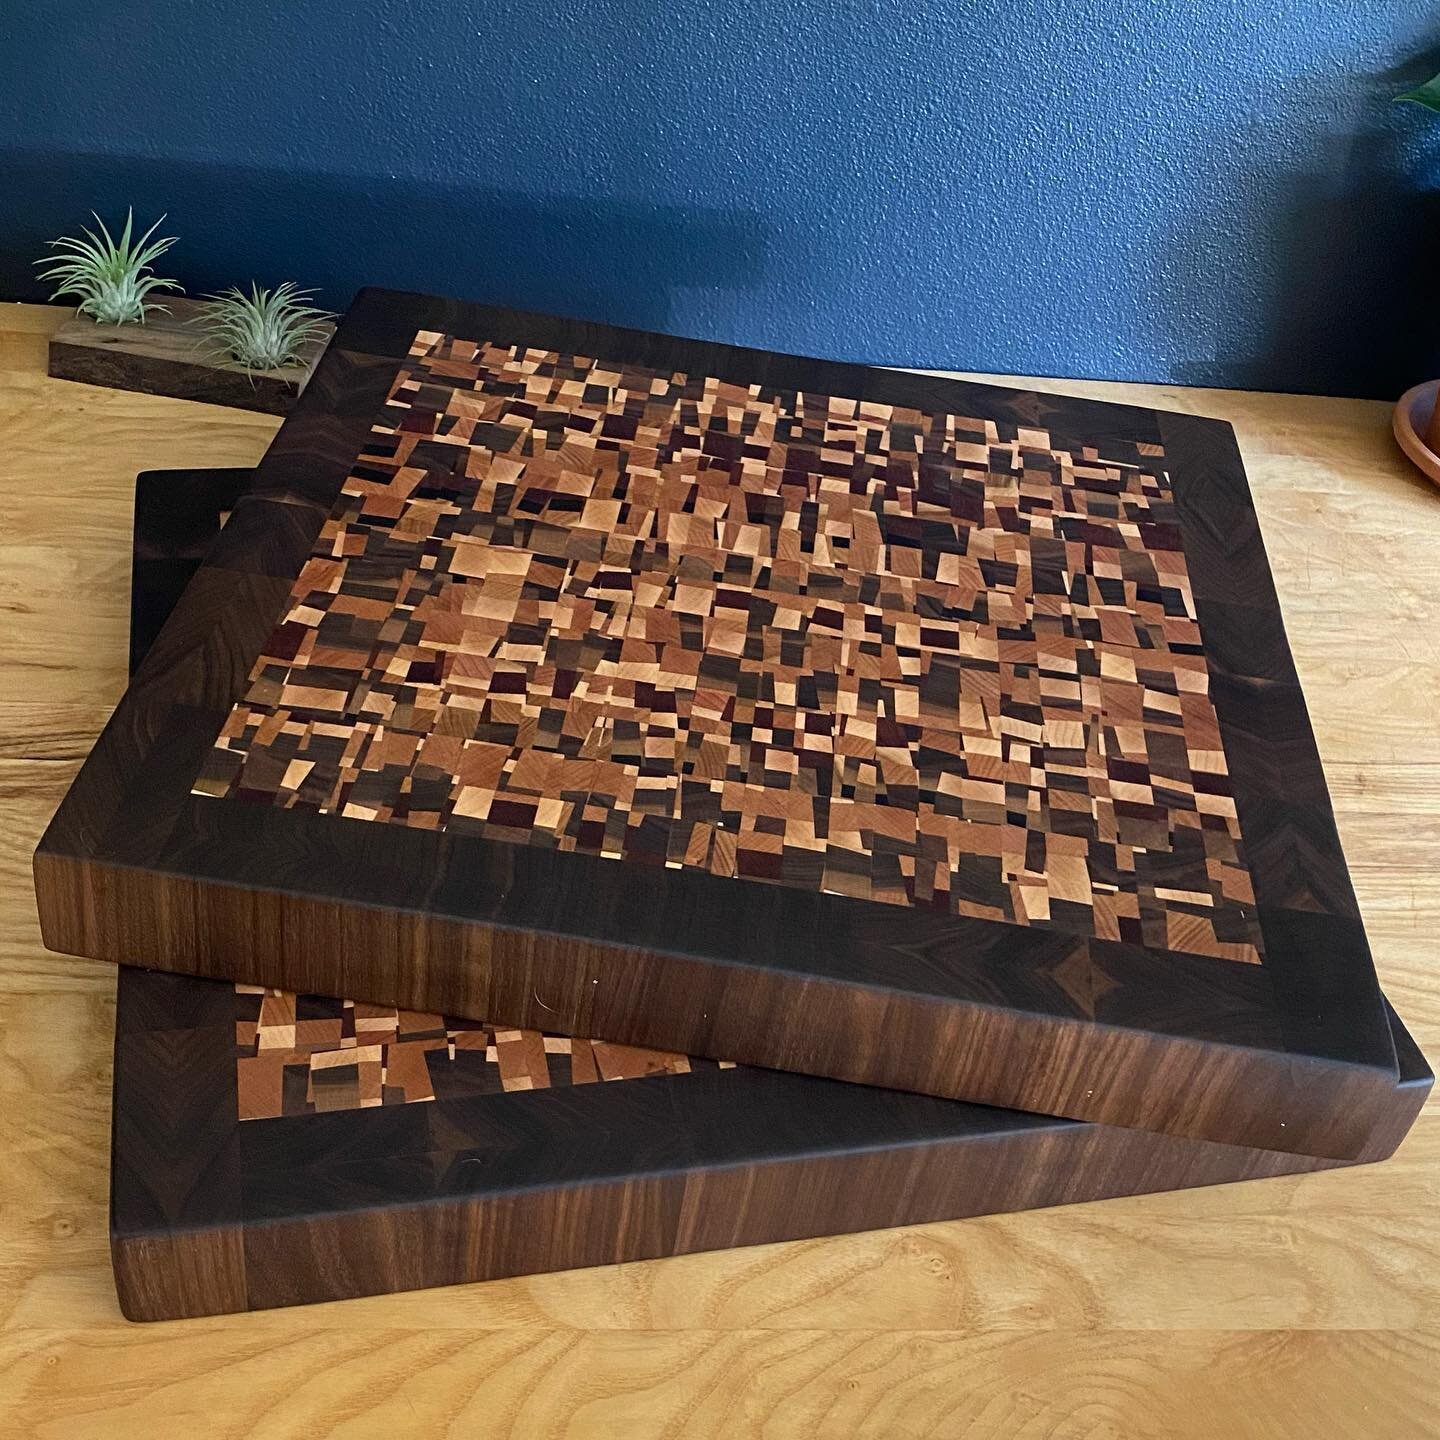 I promise it&rsquo;s the last time I&rsquo;ll mention it. There&rsquo;s still time to enter the giveaway for one of these fabulous endgrain chaos boards I made over at @woodcraftreposts. Or feel free to buy one off me. But first enter the giveaway. O